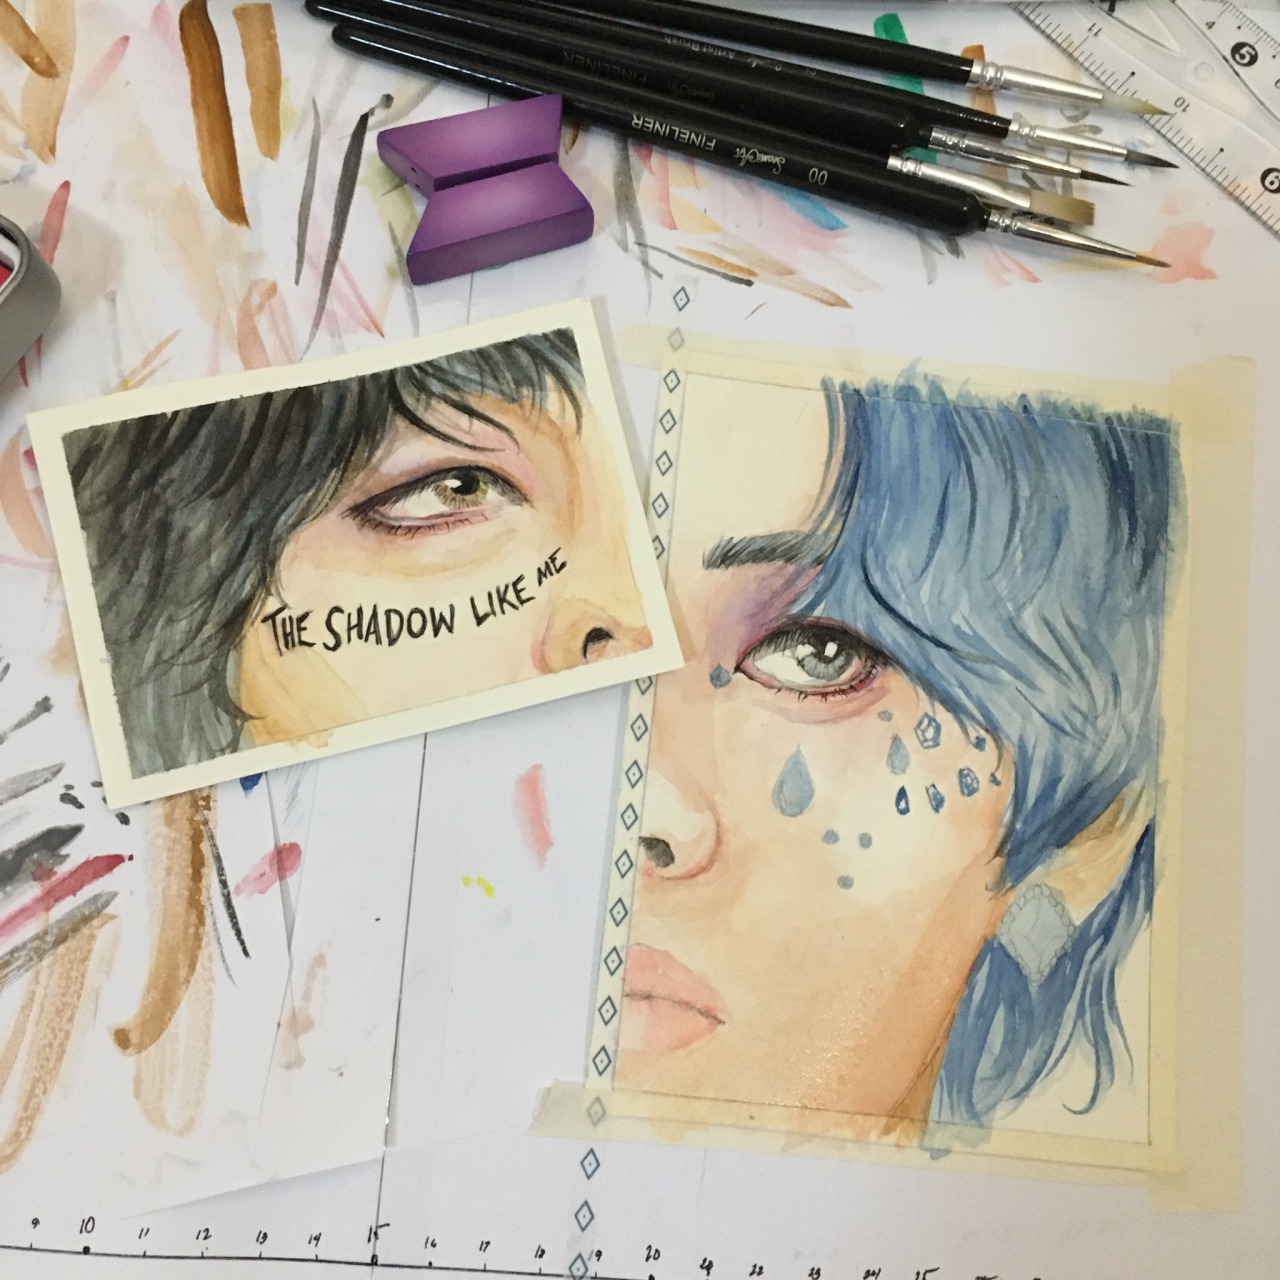 An Art Blog. — Tried Watercolor For The First Time Today ☺️ Still...